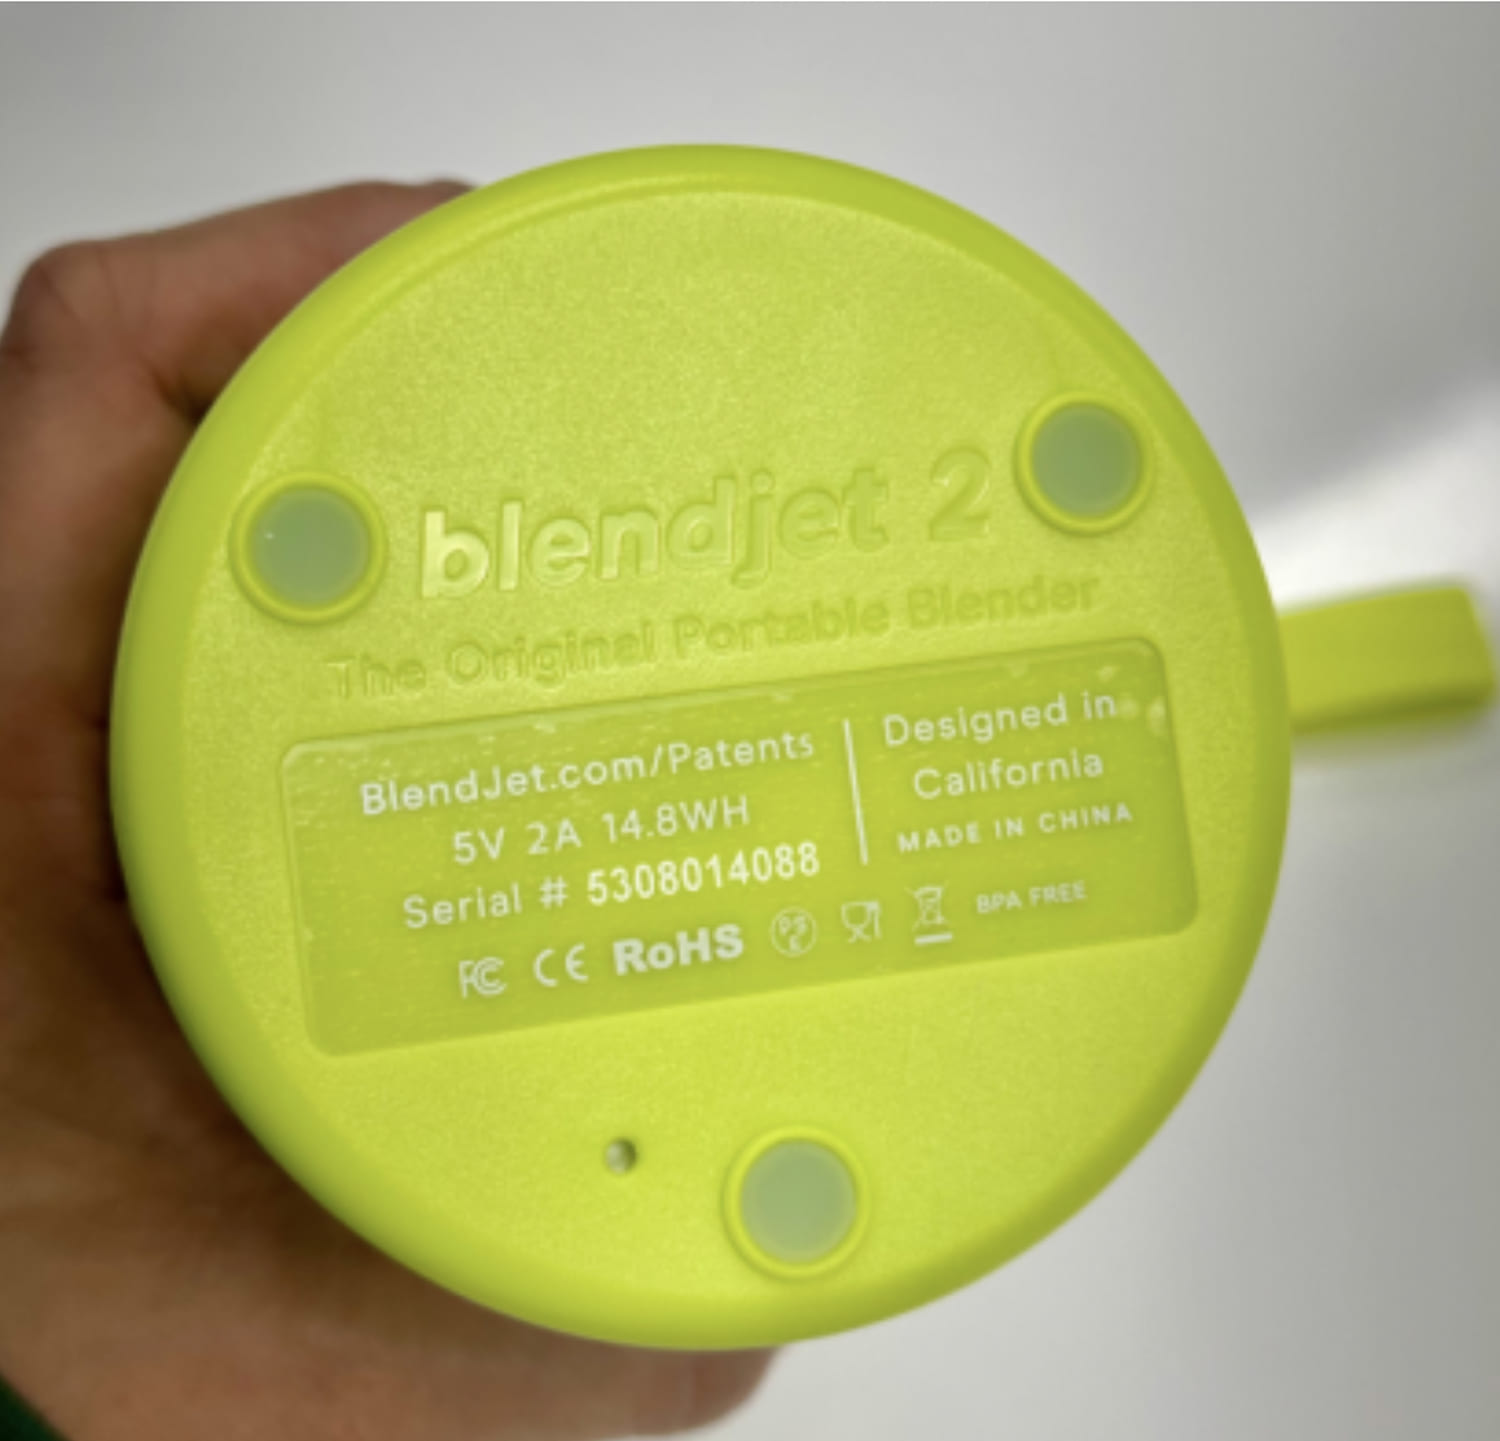 Nearly 5M BlendJet 2 Portable Blenders recalled over fire and laceration risks 1